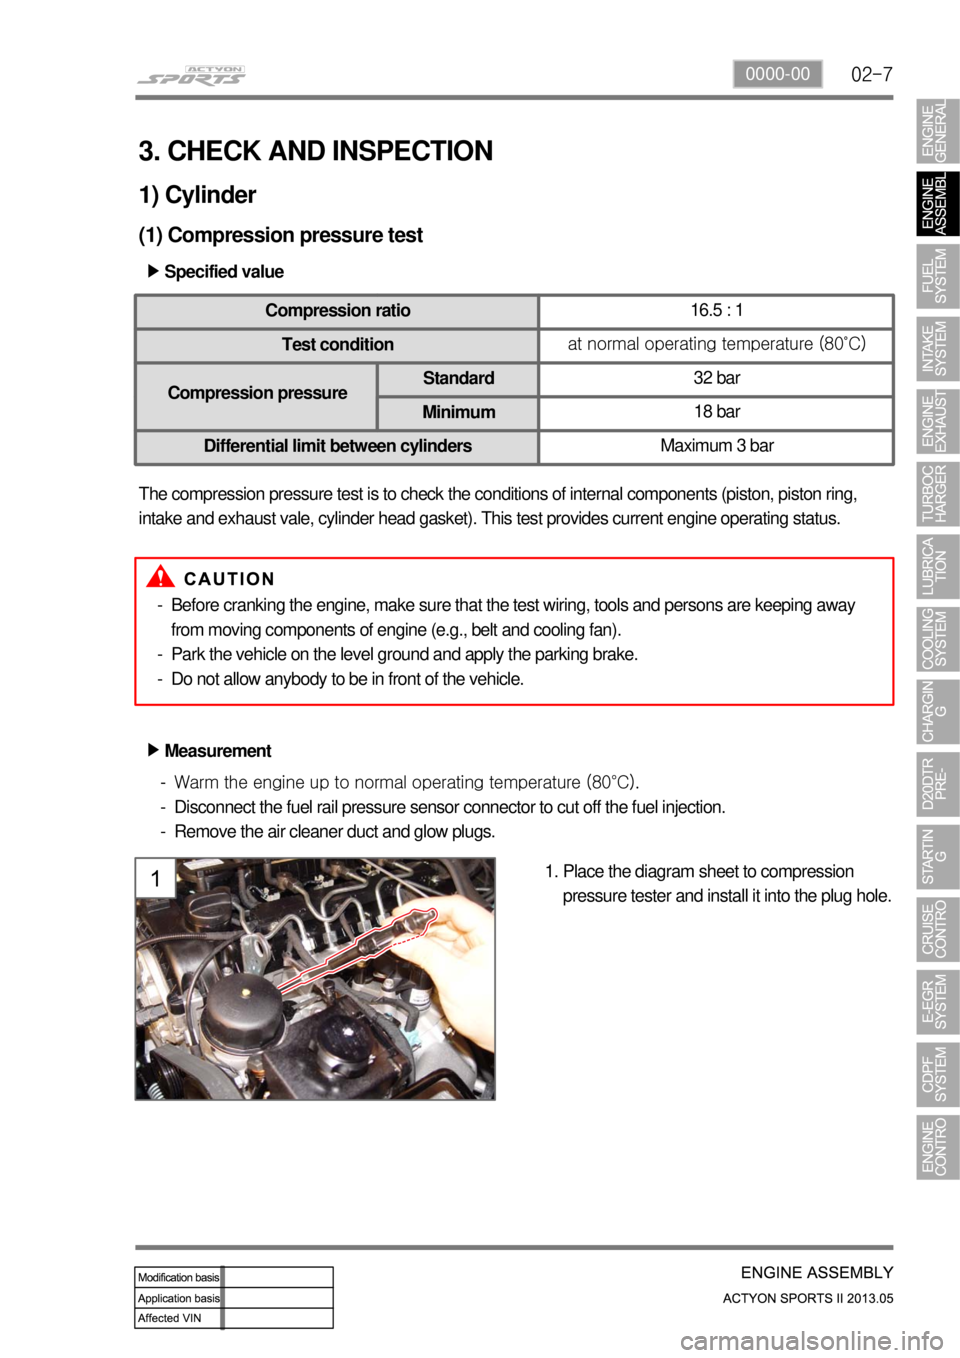 SSANGYONG NEW ACTYON SPORTS 2013 Owners Guide 02-70000-00
3. CHECK AND INSPECTION
1) Cylinder
(1) Compression pressure test
Specified value ▶
Compression ratio16.5 : 1 
Test conditionat normal operating temperature (80˚C)
Compression pressureS